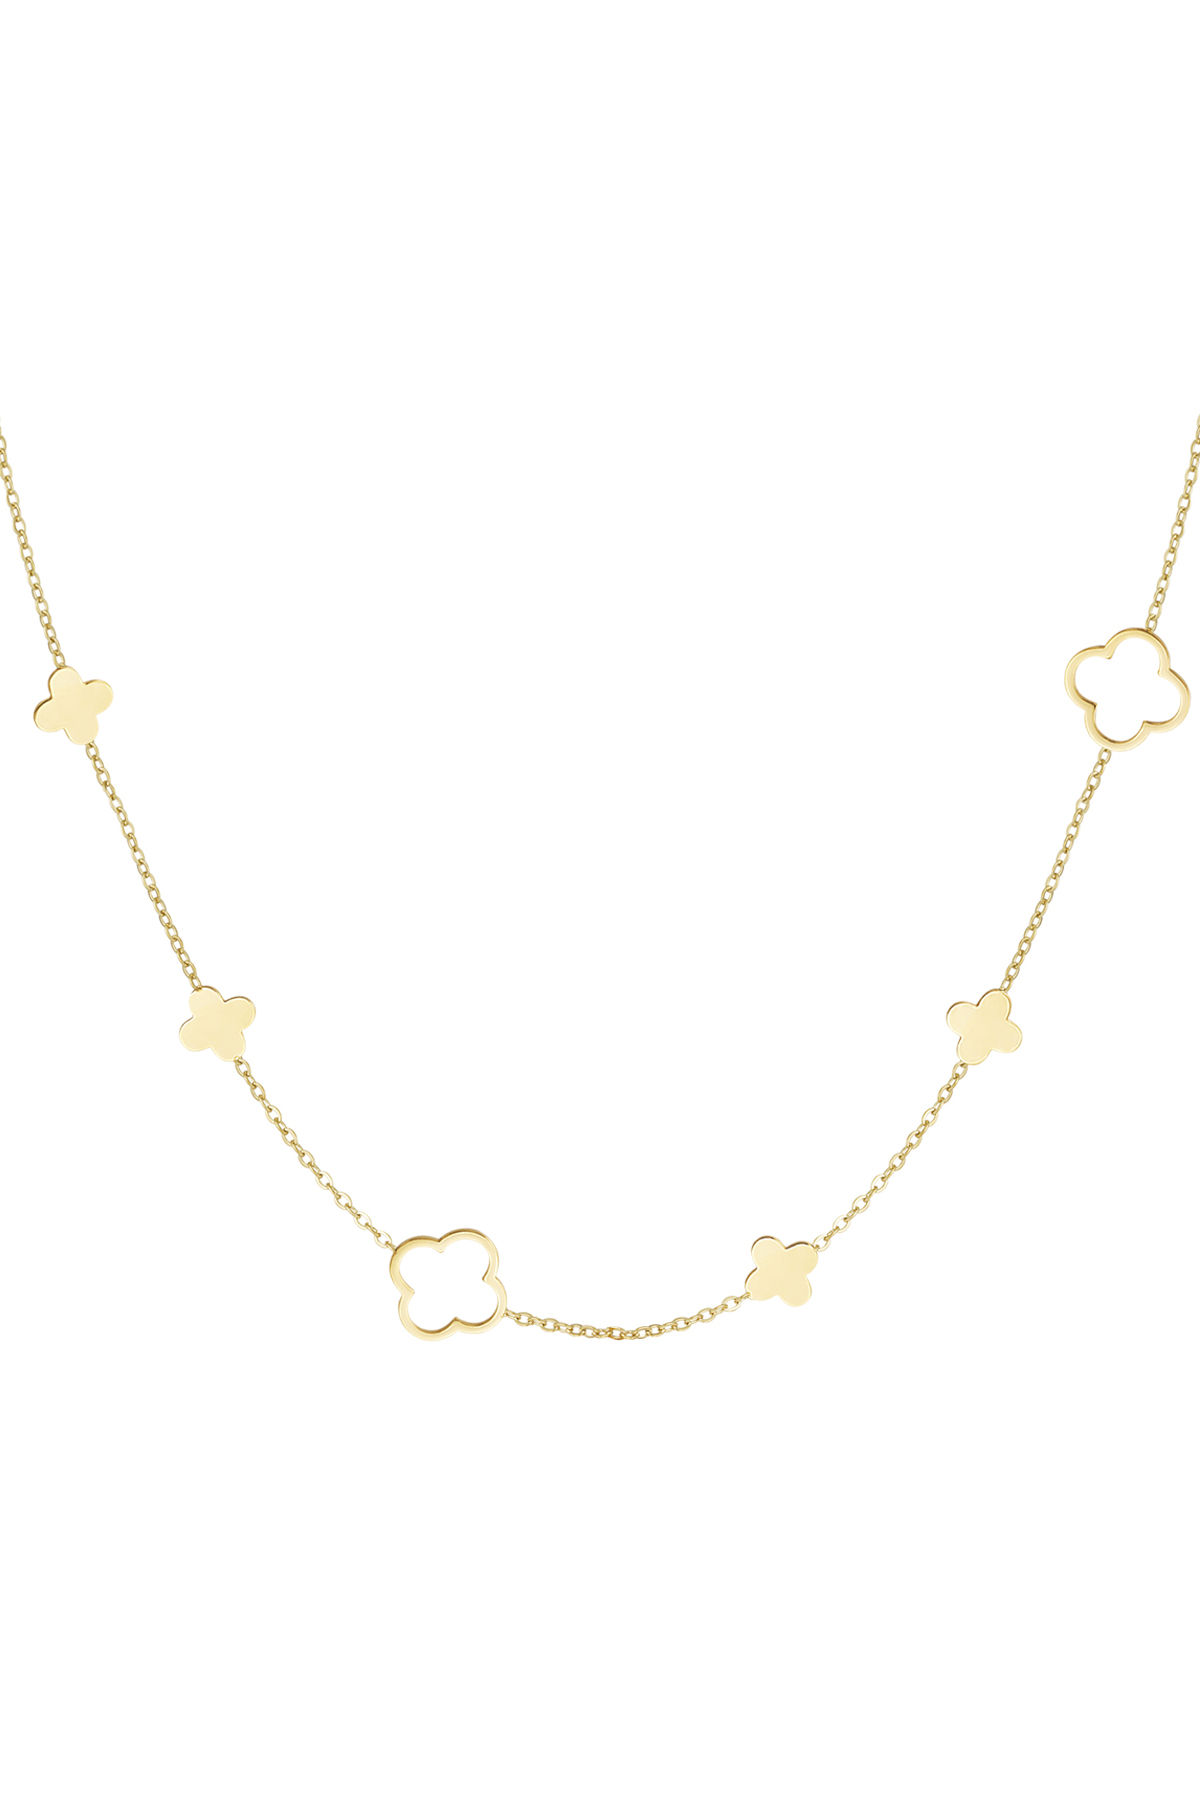 Necklace different clovers - gold